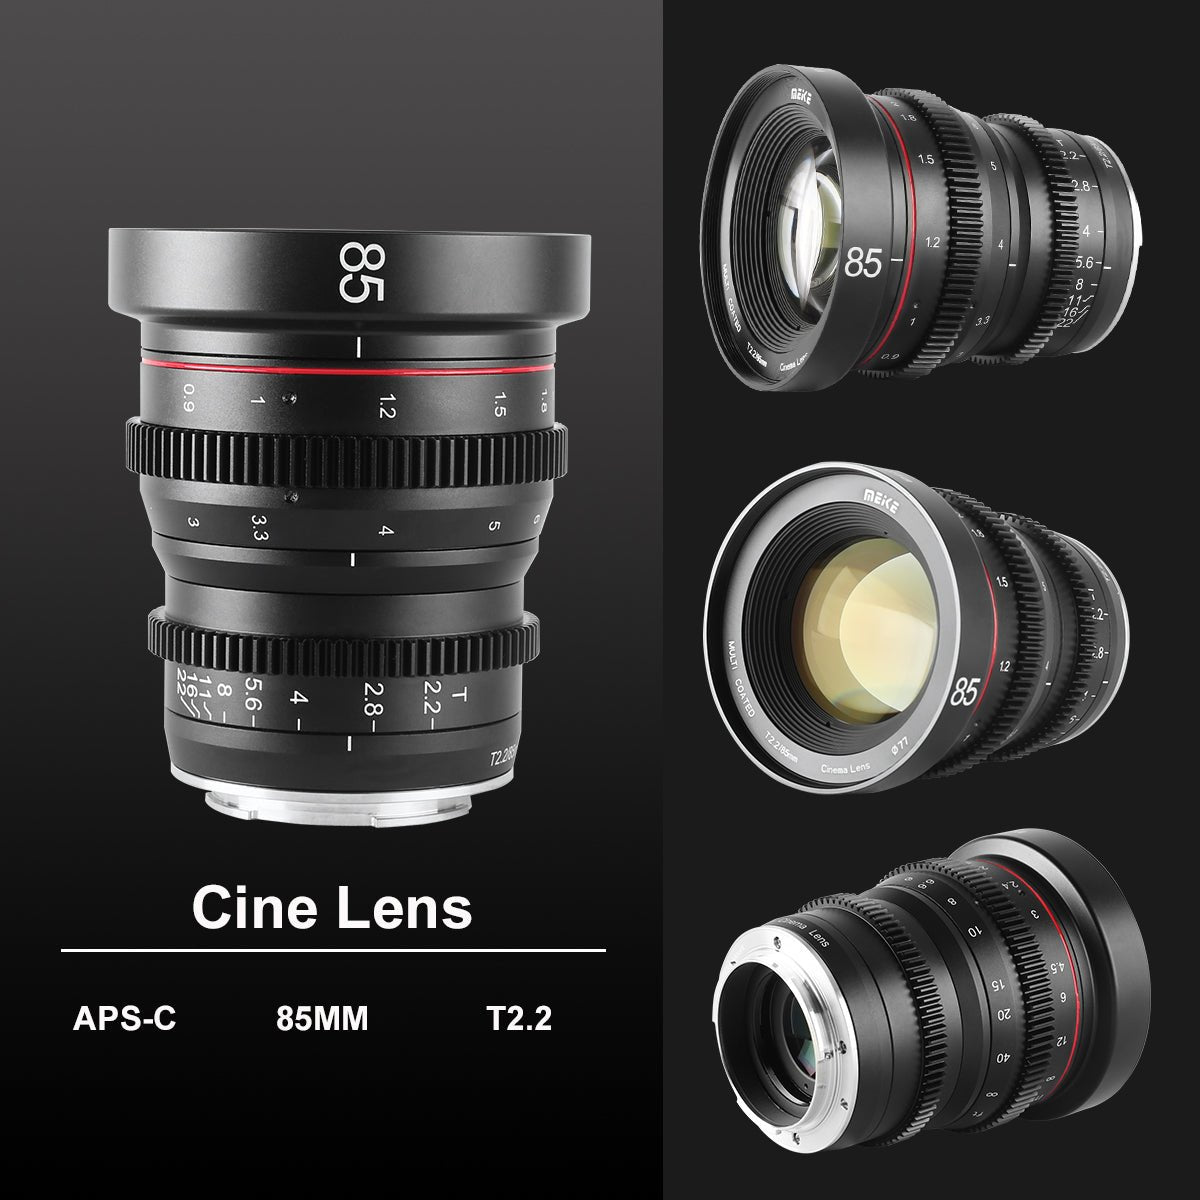 Meike Cinema Prime 85mm T2.2 Lens (Sony E Mount) in Different Perspectives